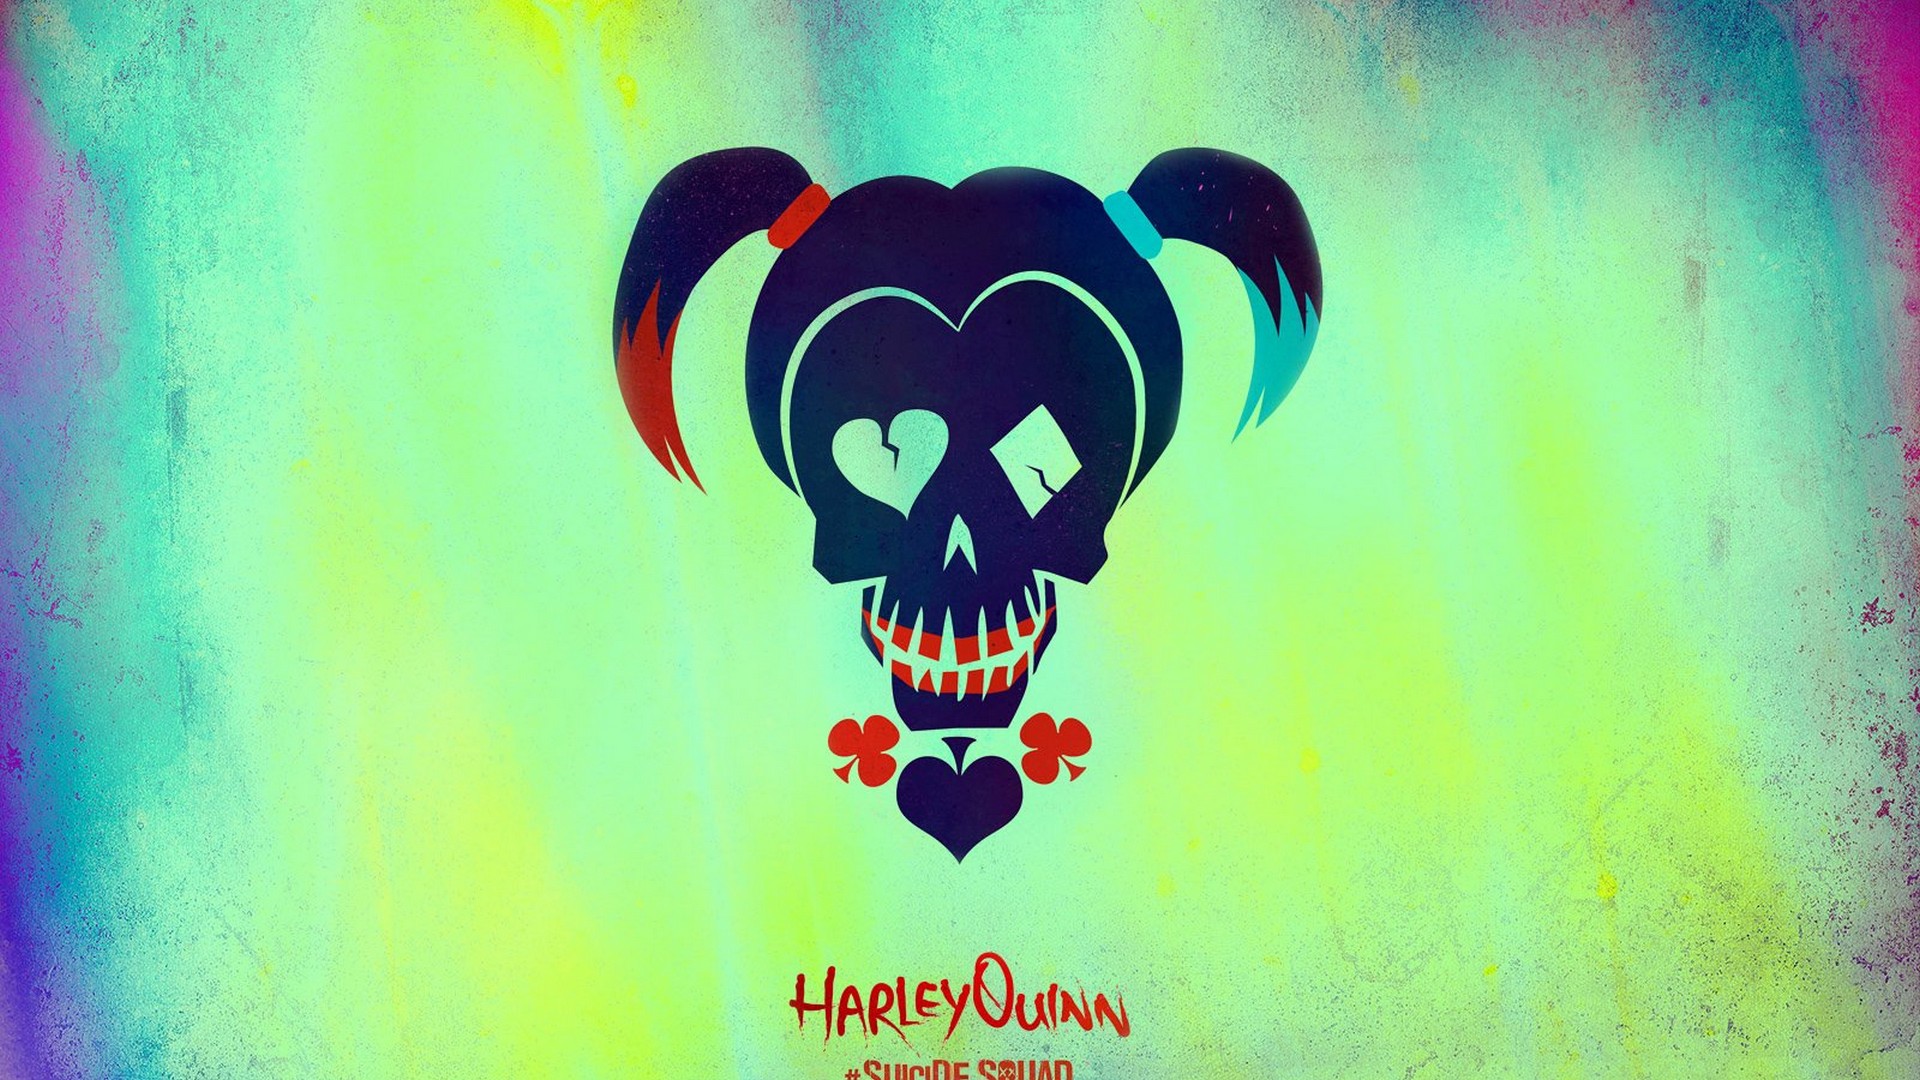 Best Harley Quinn Wallpaper with resolution 1920X1080 pixel. You can use this wallpaper as background for your desktop Computer Screensavers, Android or iPhone smartphones